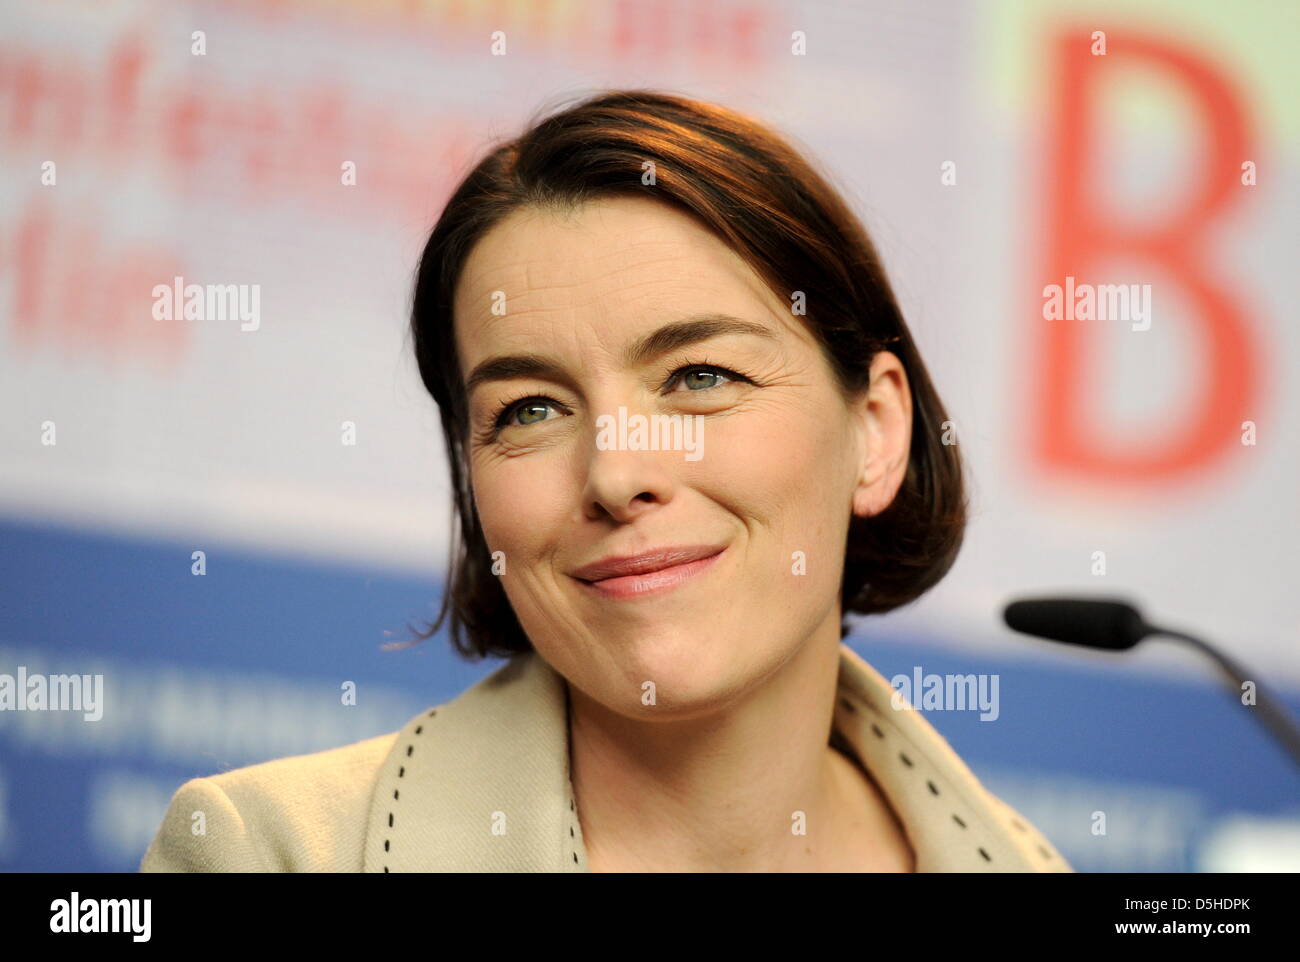 British actress Olivia Williams attends the press conference of the film 'The Ghost Writer' during the 60th Berlinale international film festival on Friday 12 February 2010 in Berlin. The festival runs until 21 Febuary 2010. Photo: Marcus Brandt dpa/lbn Stock Photo